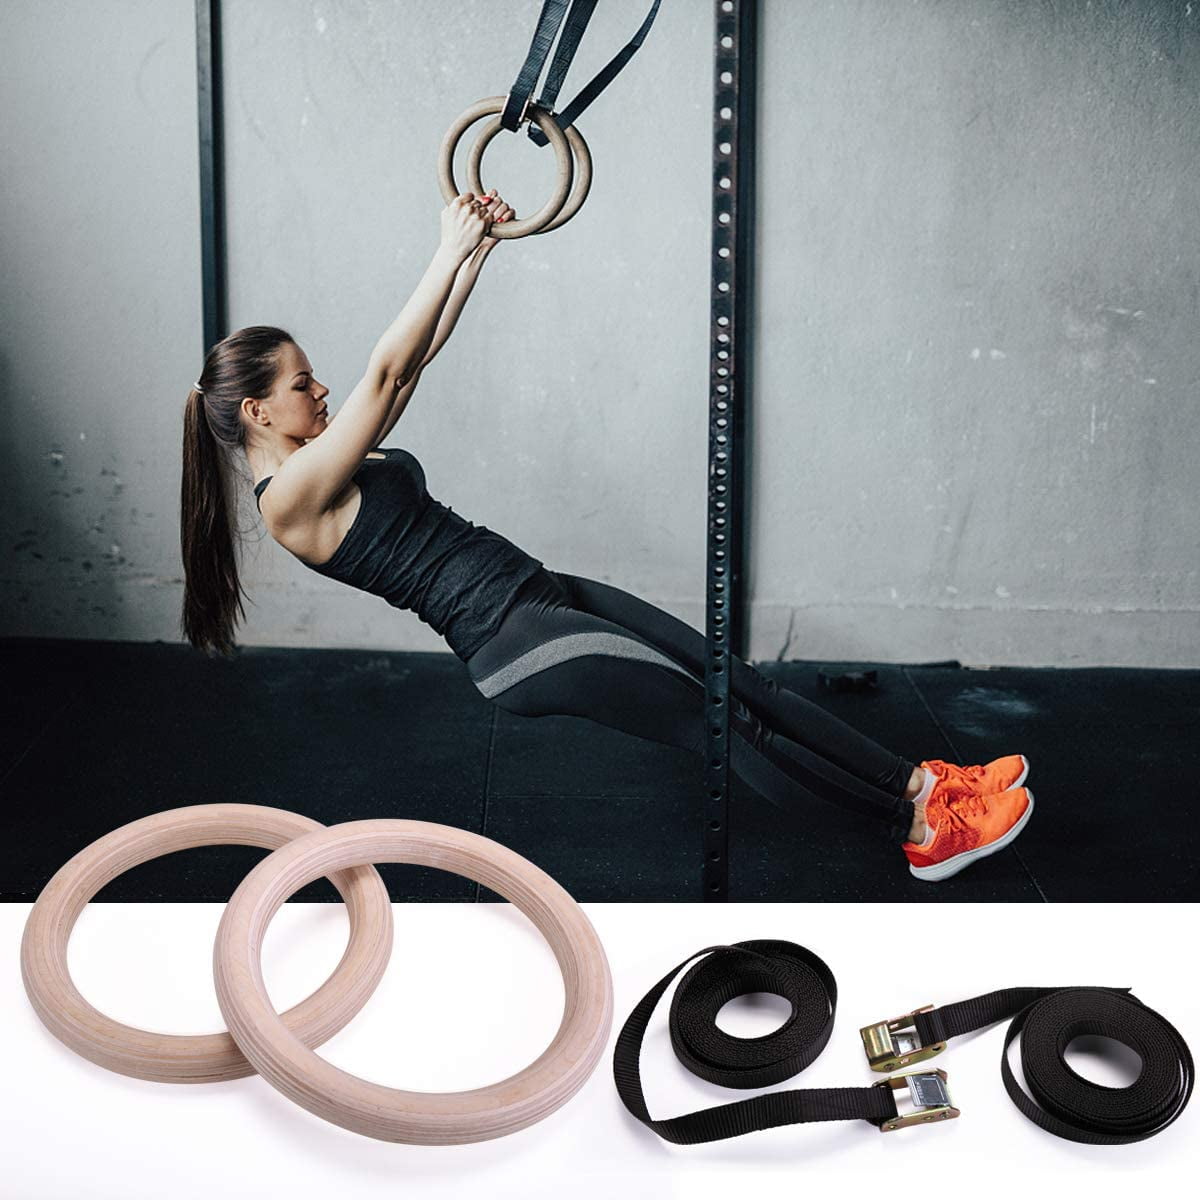 Gym Rings Adjustable Long Buckles Straps Workout Wood Gymnastic Cross Fitness 